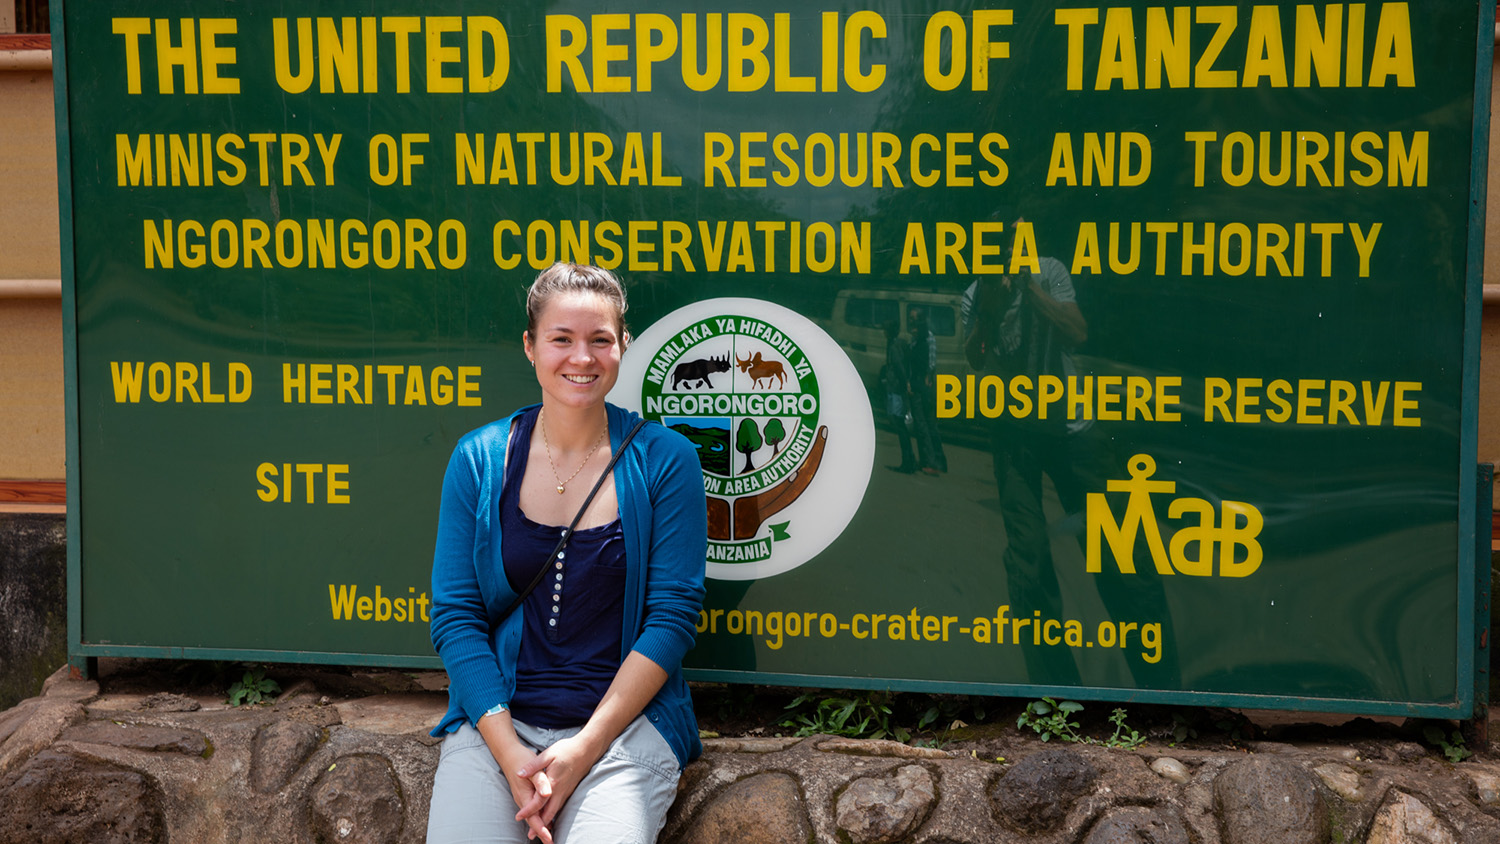 In front of the entrance to Ngorongoro conservation area.